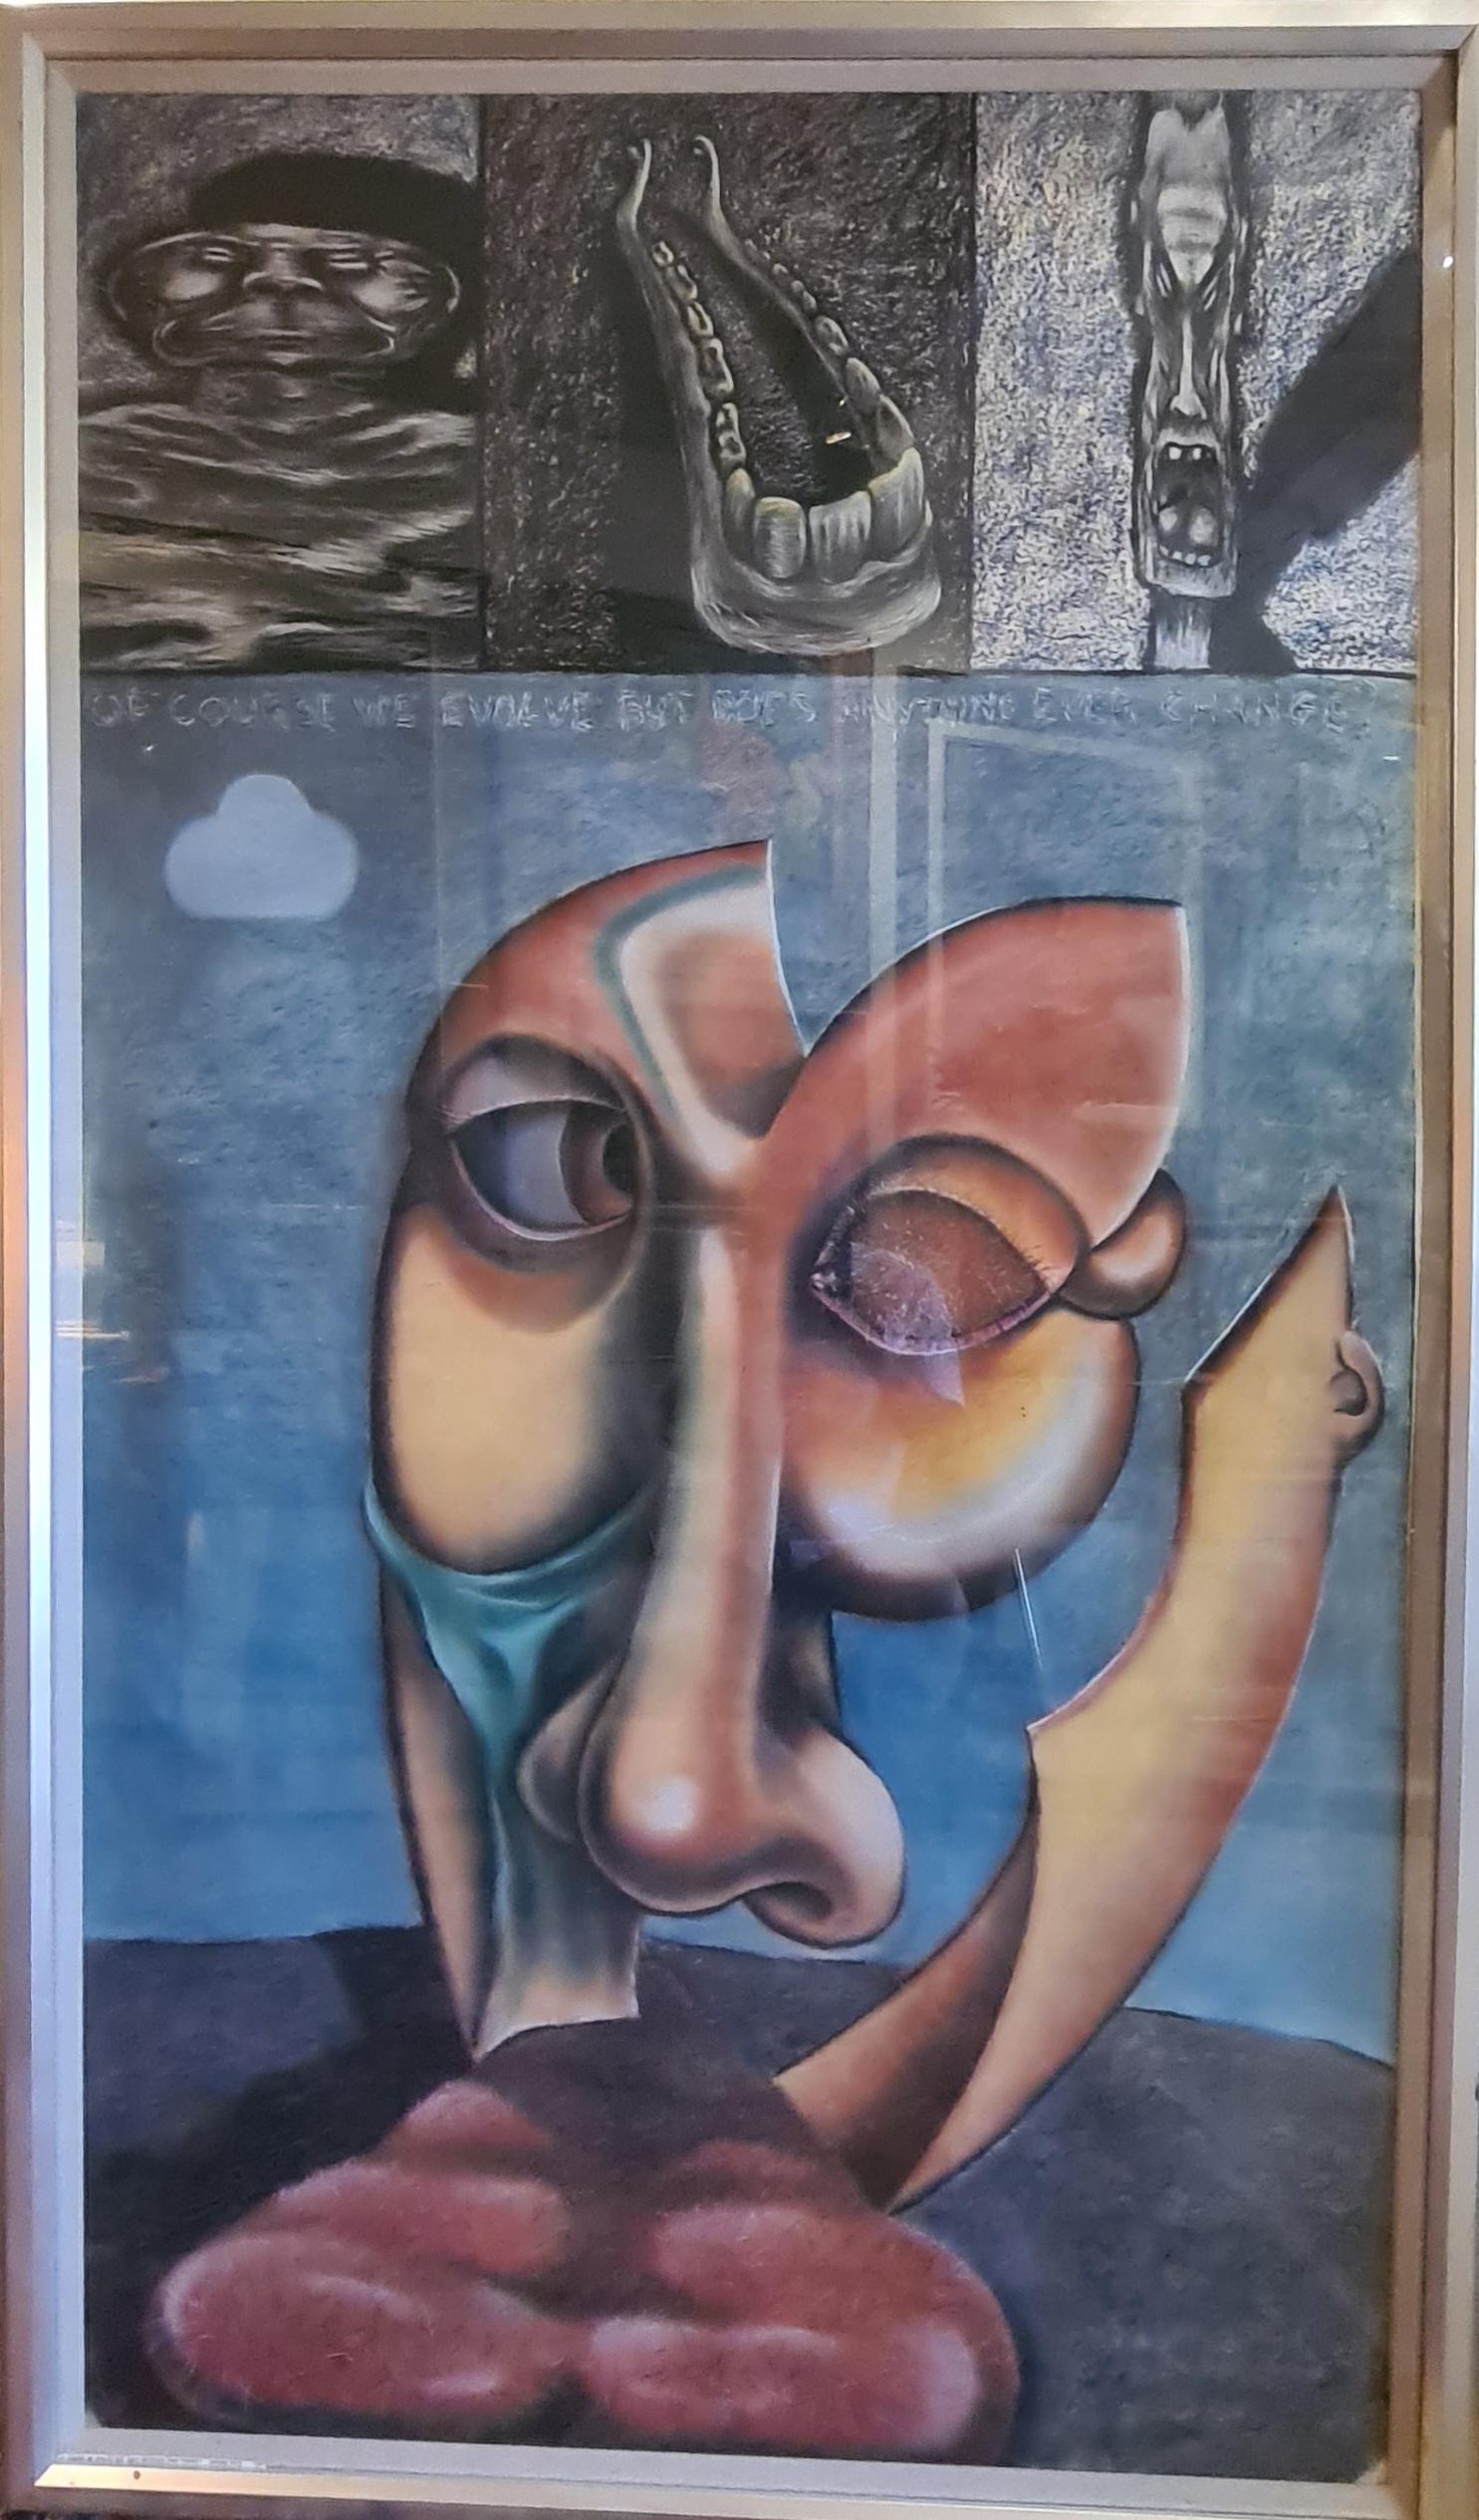 Monumental Surrealist Pastel, Of Course We Evolve But Does Anything Ever Change? - Painting by Gordon Muir